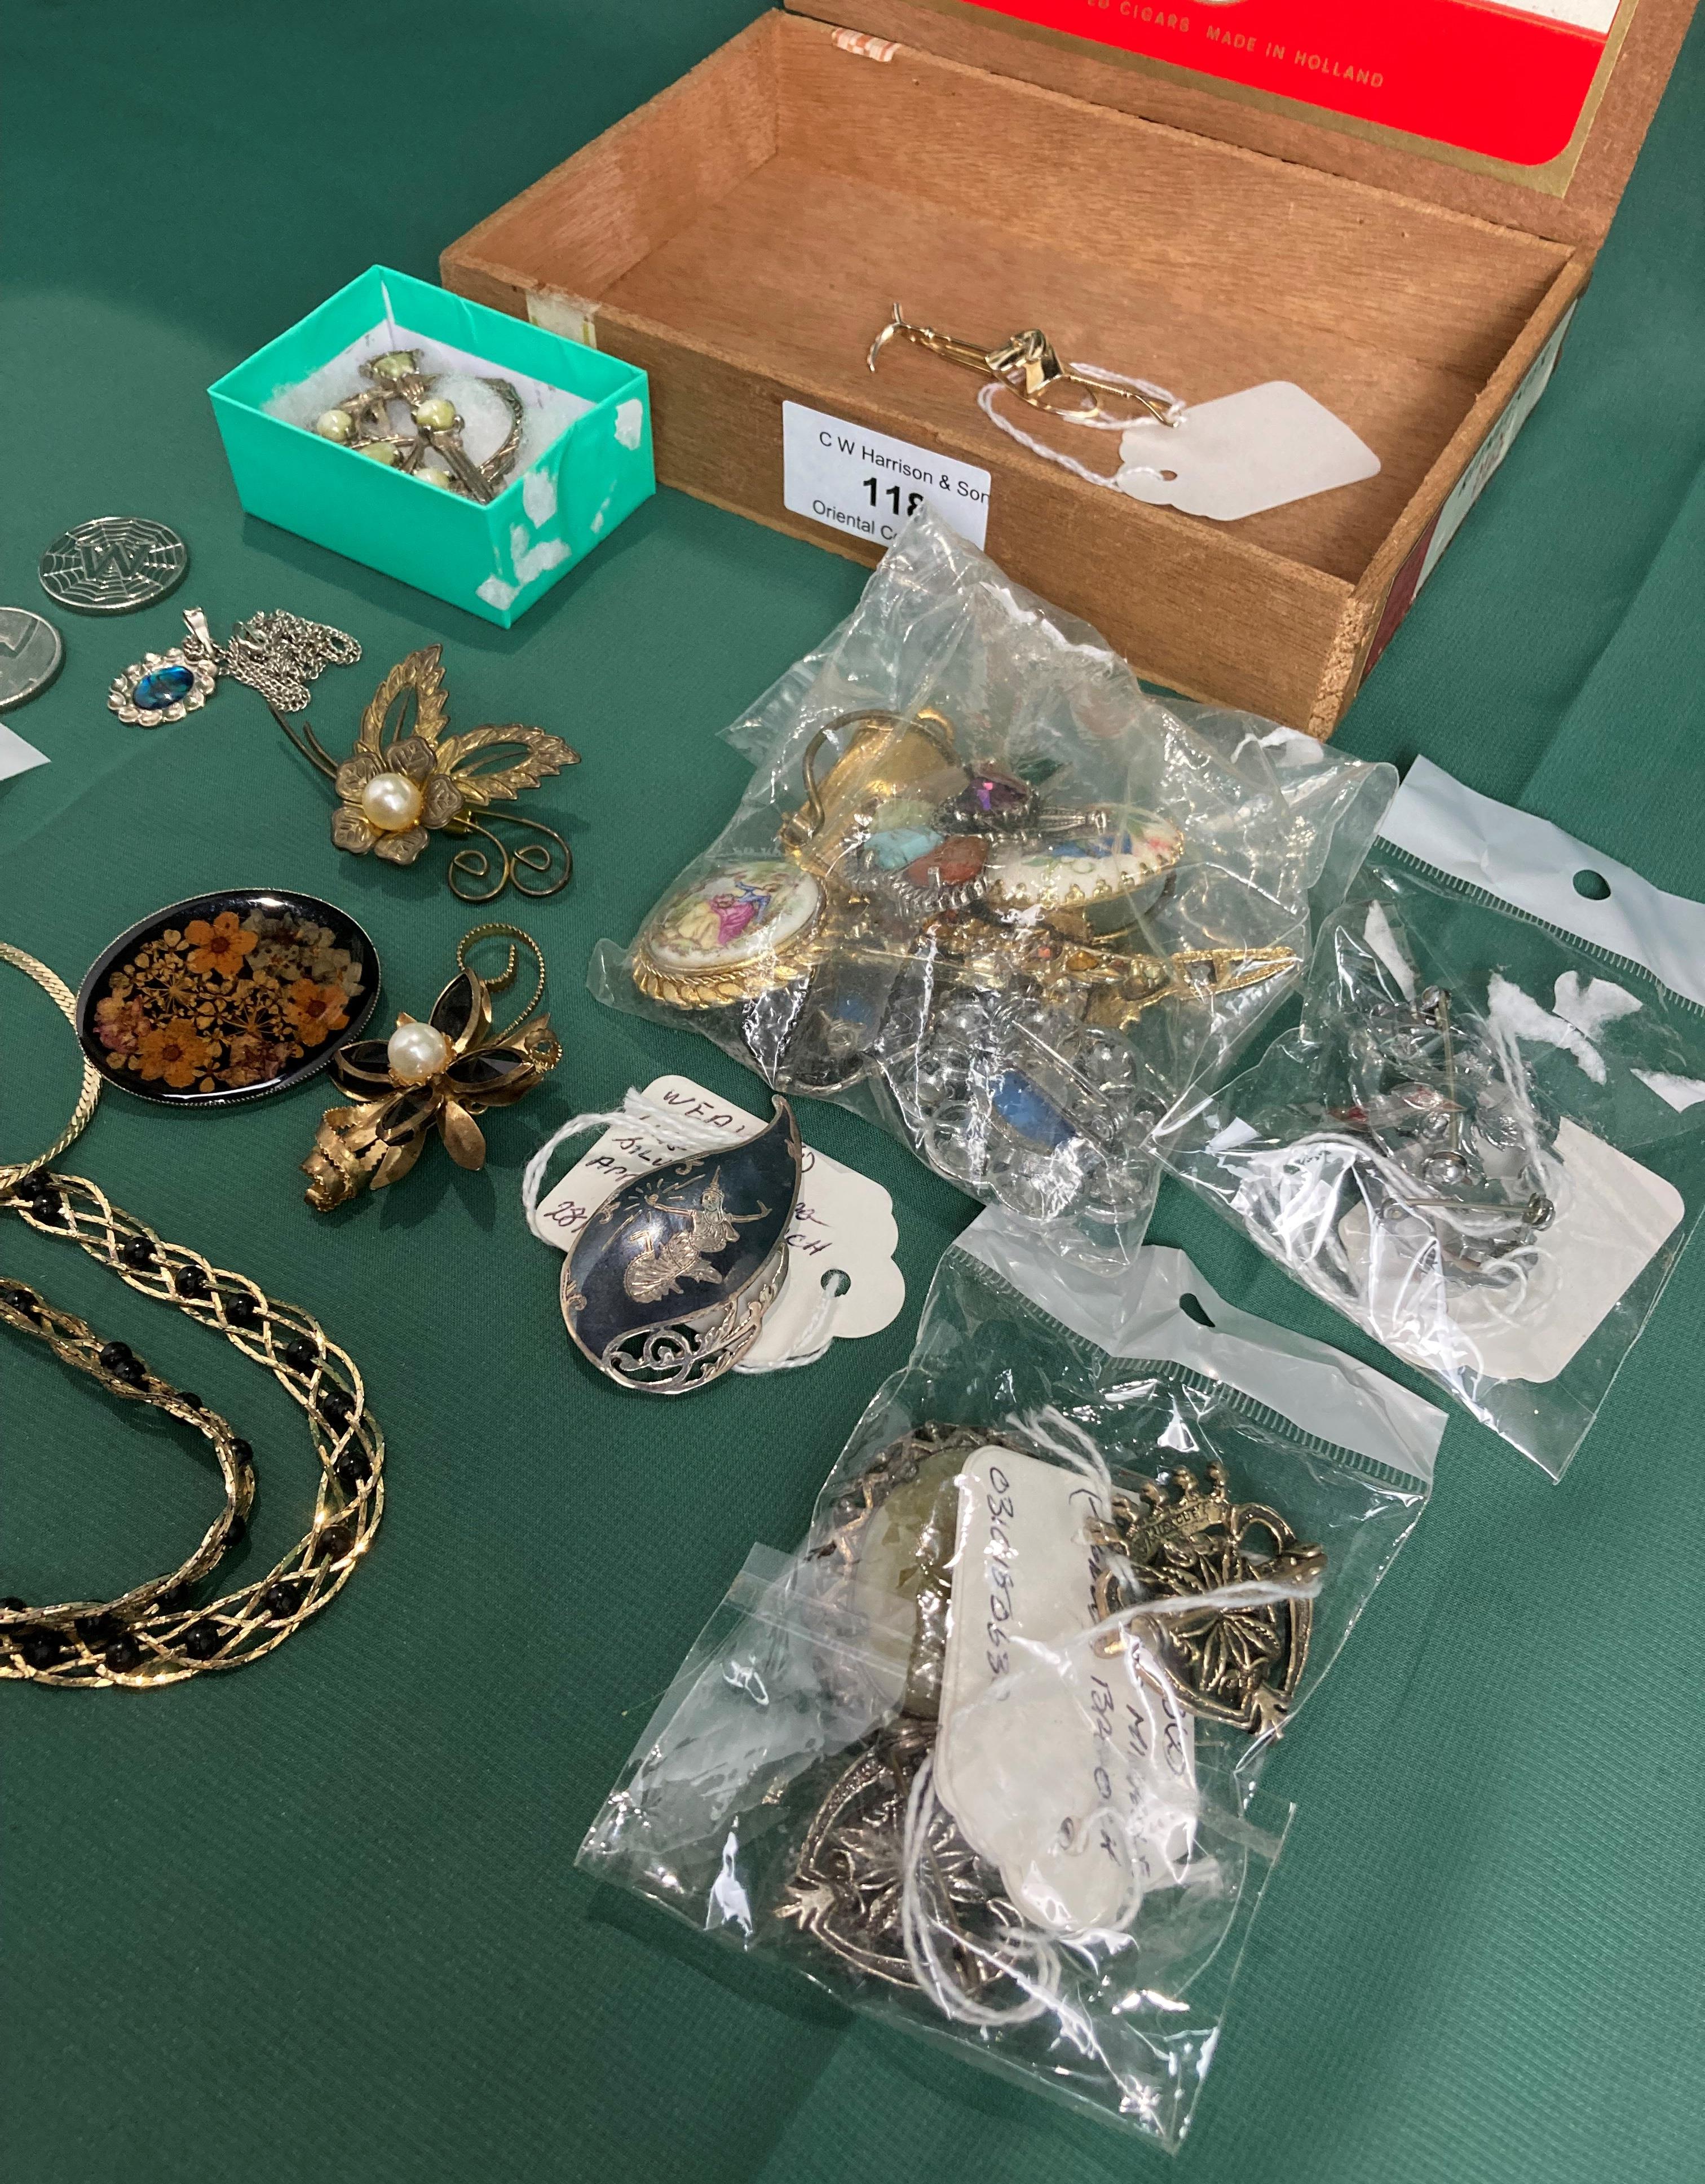 Contents to cigar box - assorted costume jewellery including Scottish brooches, chains, - Bild 3 aus 4